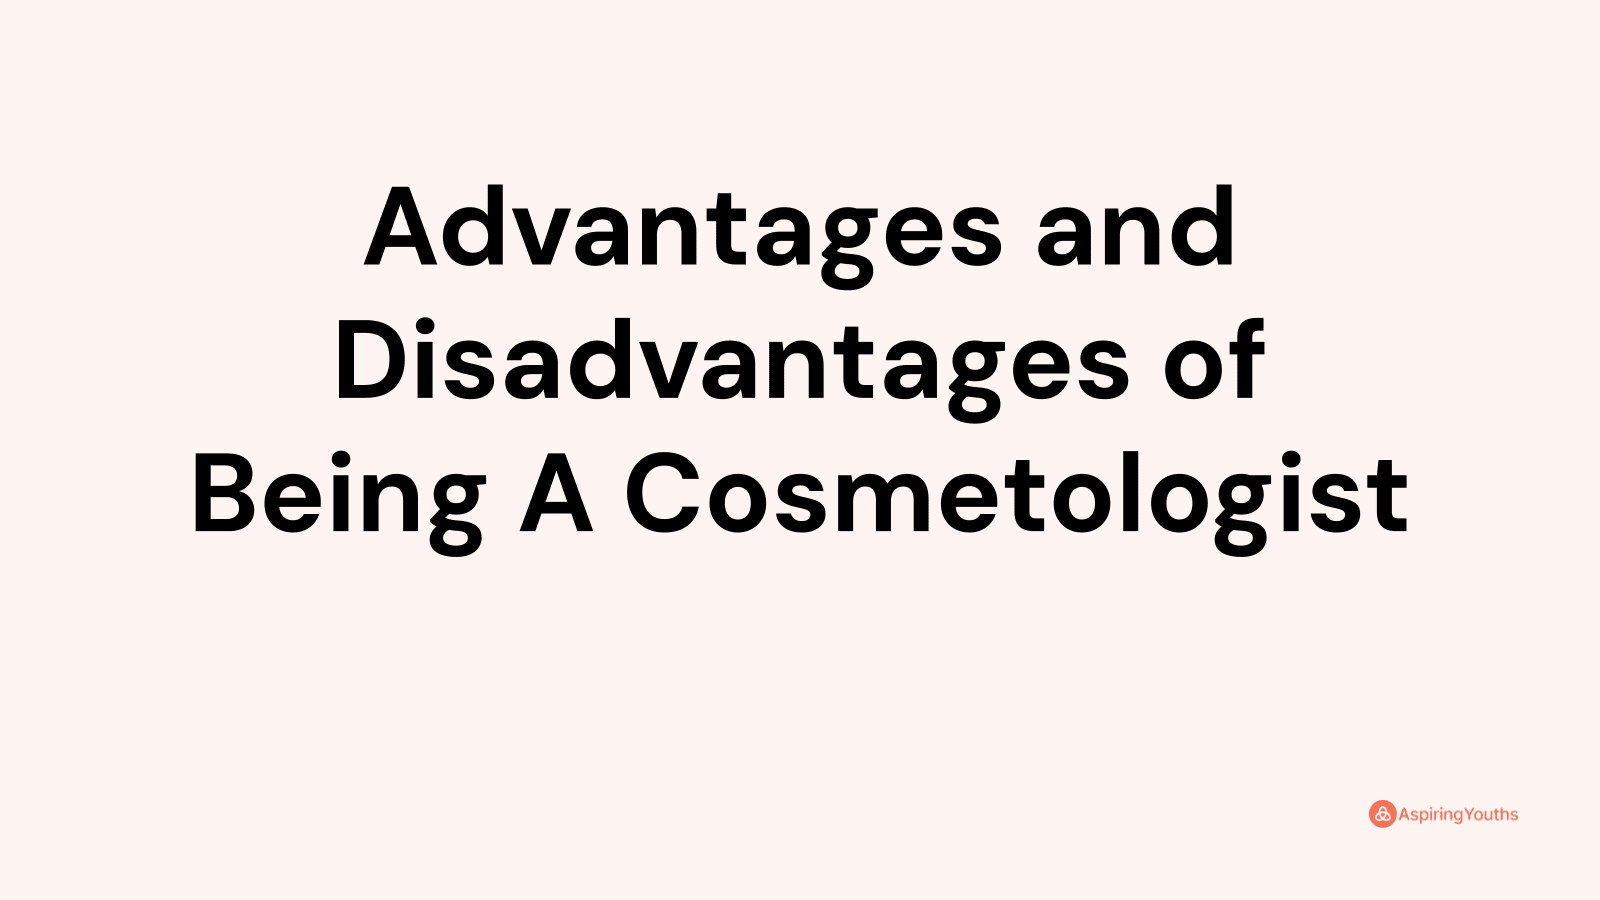 Advantages and disadvantages of Being A Cosmetologist